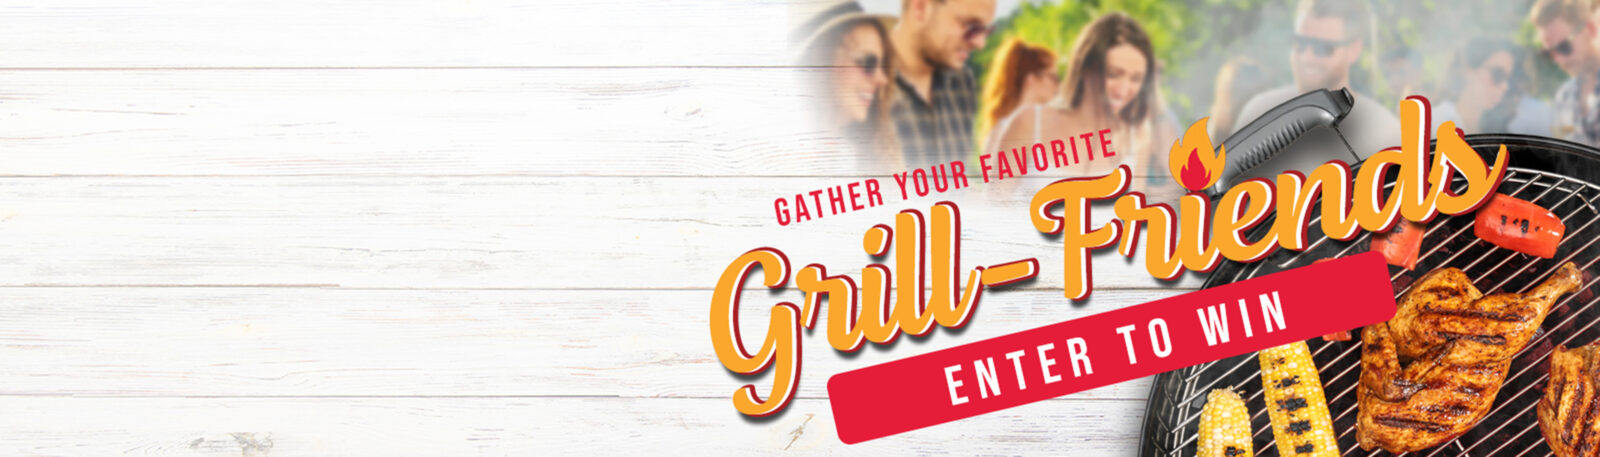 Grill Friends Promotion